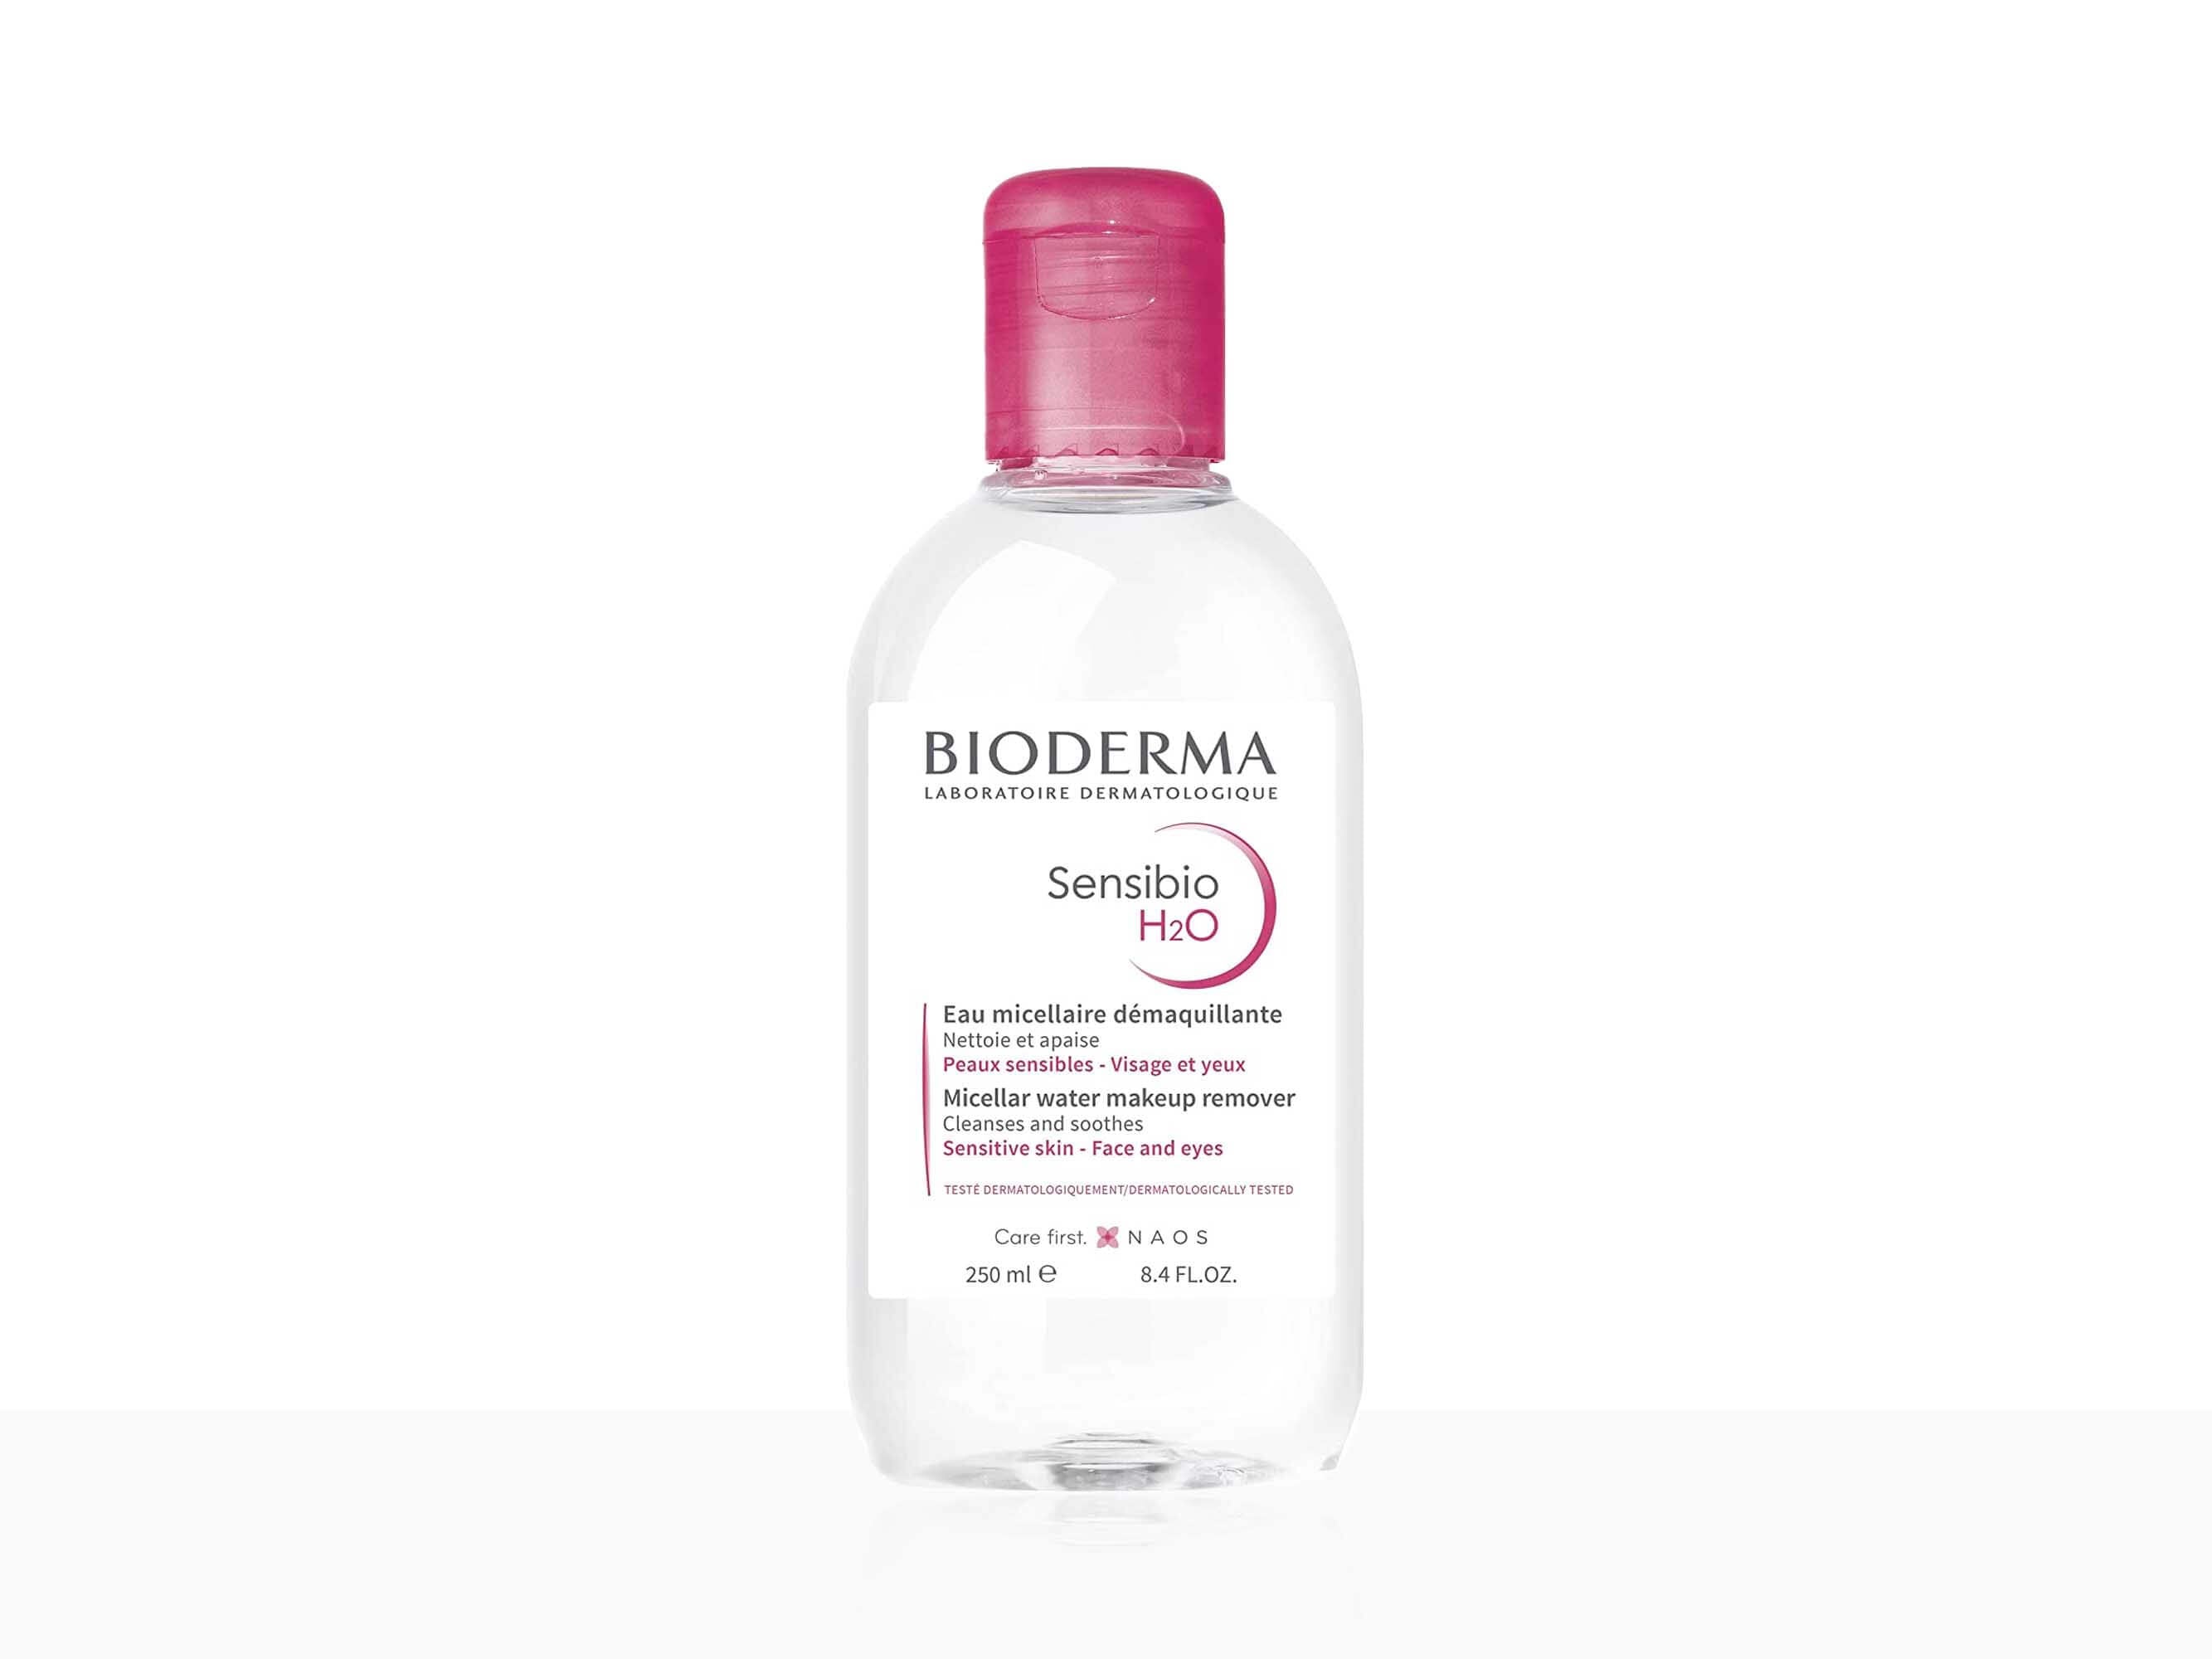 I Tried Bioderma's Micellar Water and Now It's My Go-To Makeup Remover